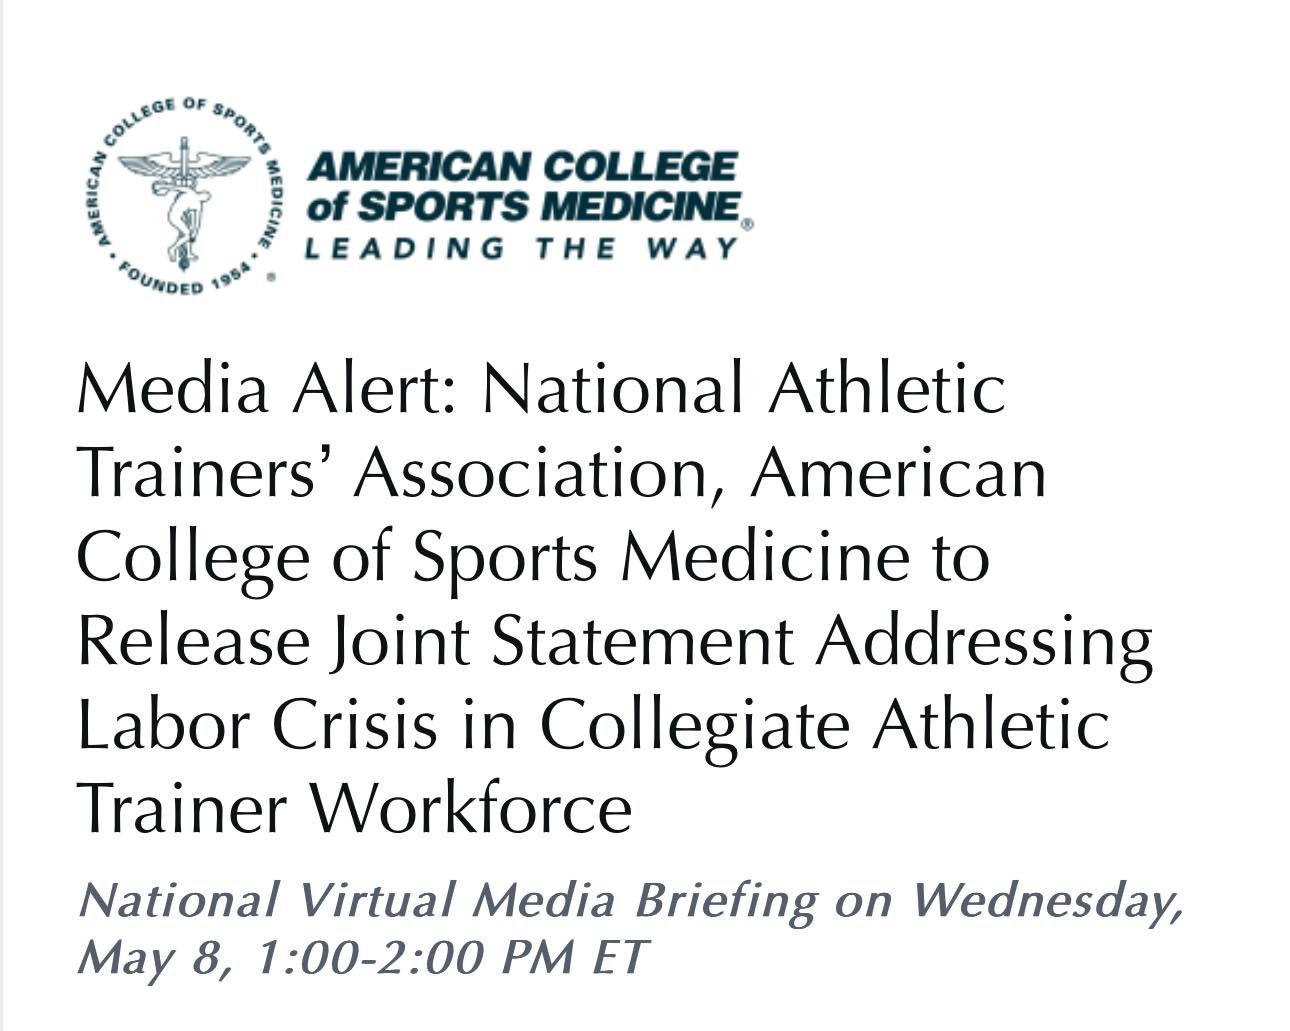 On Wednesday, May 8, 1:00 PM ET, The National Athletic Trainers&rsquo; Association (NATA) and the American College of Sports Medicine (ACSM) will issue a joint statement in support of the collegiate athletic trainer workforce and the student athletes